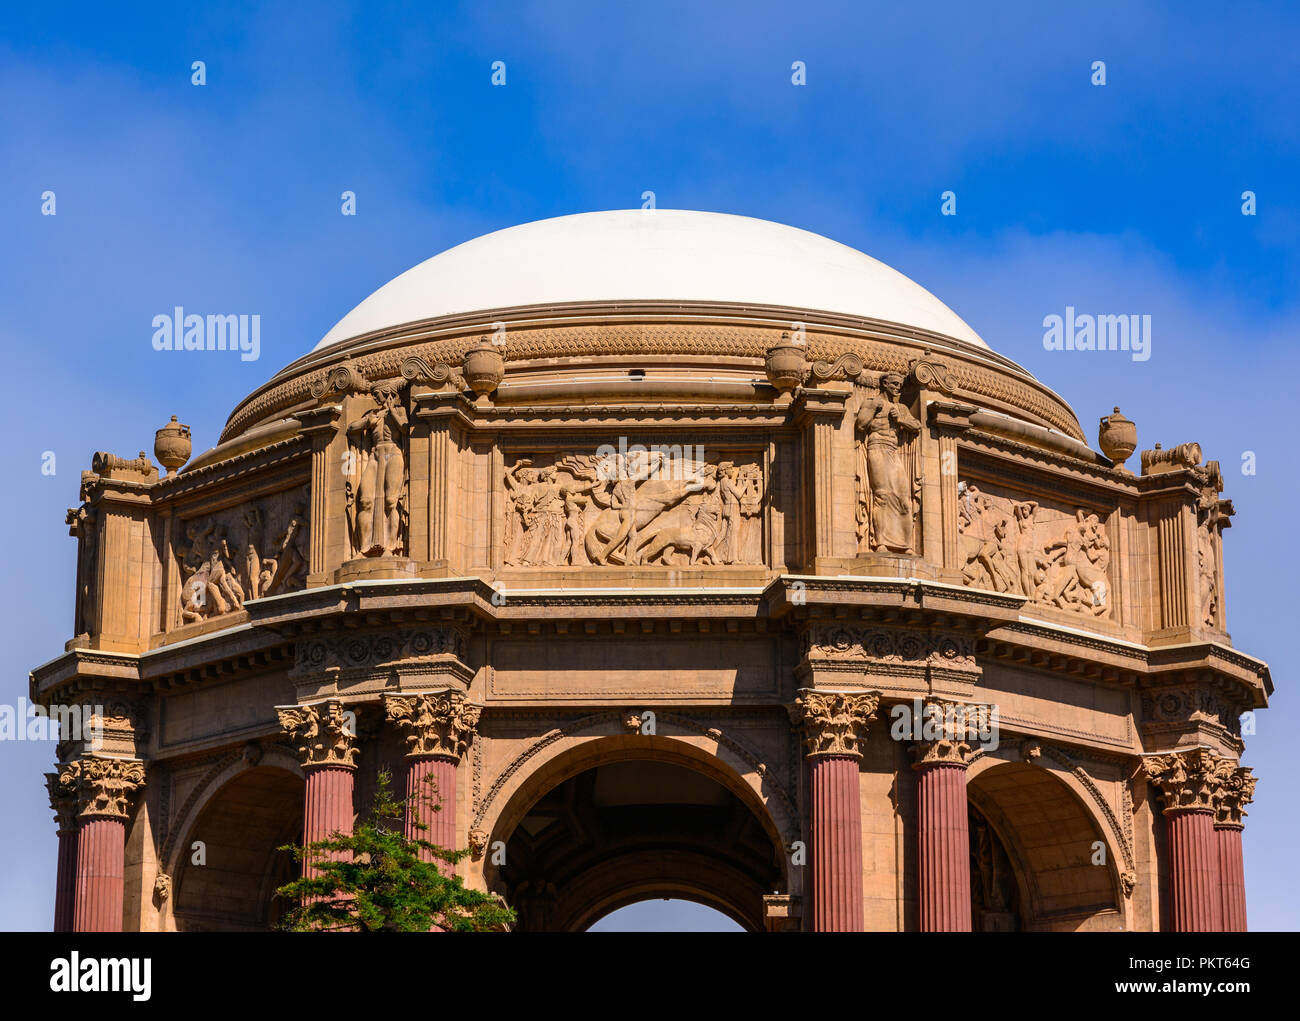 The Top Of The Large White Dome Of The Palace Of Fine Arts Theatre In San Francisco Stock Photo